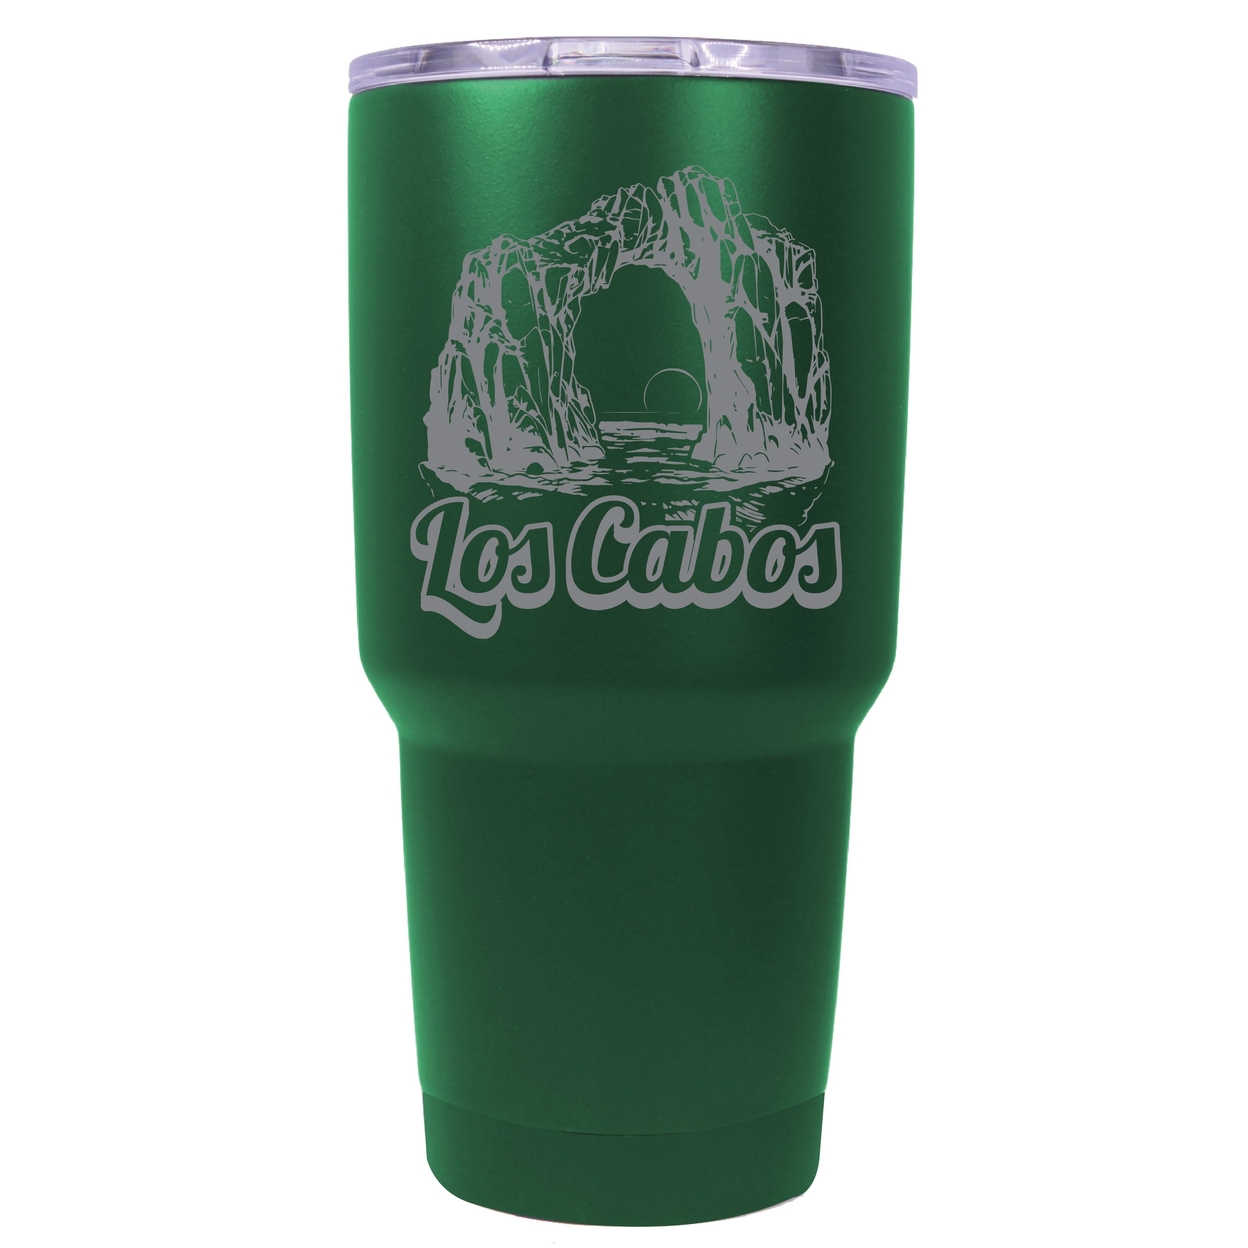 Los Cabos Mexico Souvenir 24 Oz Engraved Insulated Stainless Steel Tumbler - Green,,2-Pack